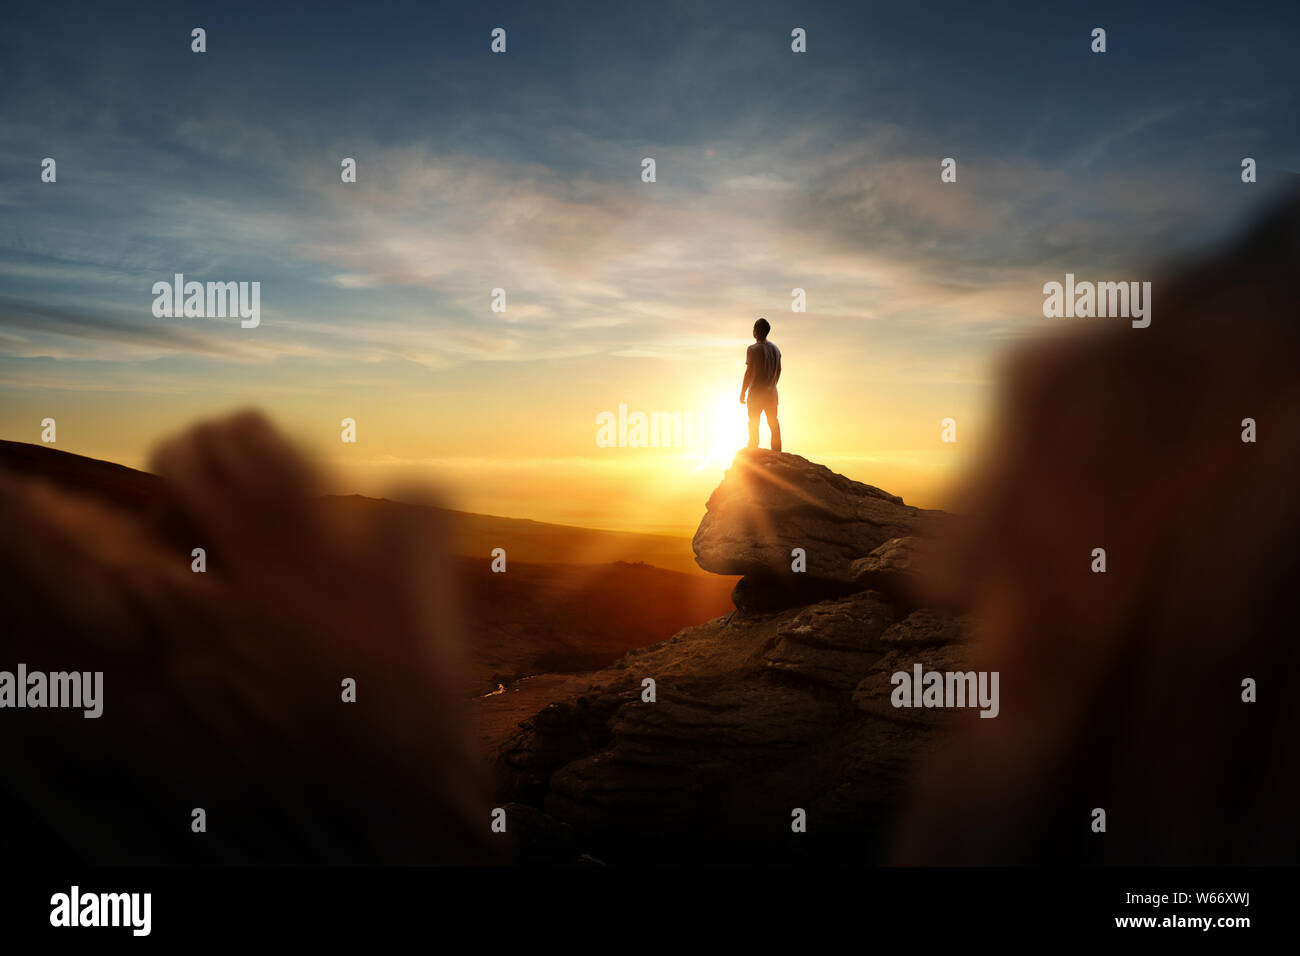 Leadership And Goals. A man standning on top of a mountain watching the sun set. Conceptual photo composite. Stock Photo